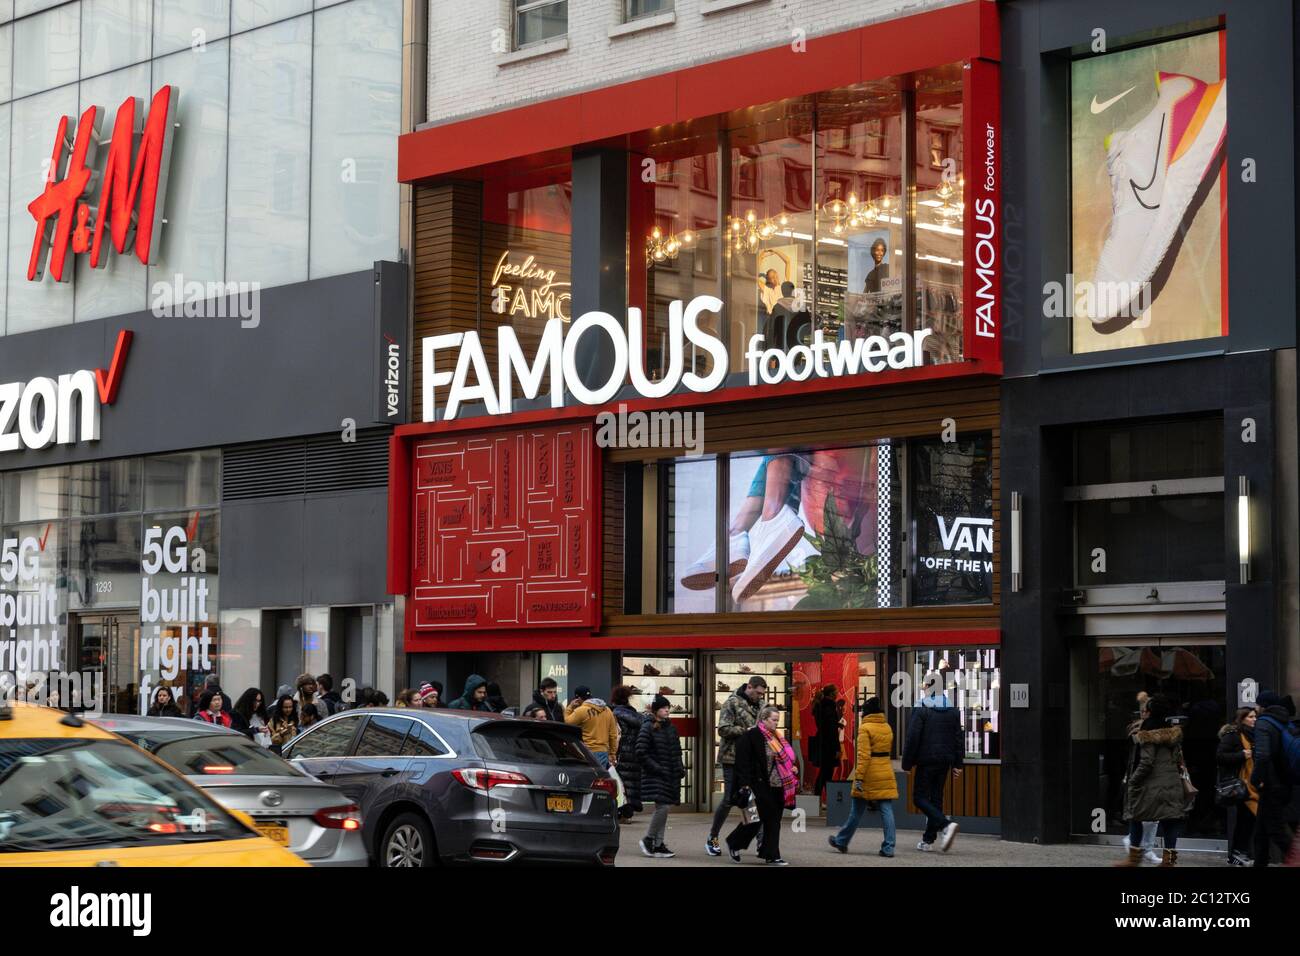 Famous Footwear Storefront on West 34th Street, NYC Stock Photo